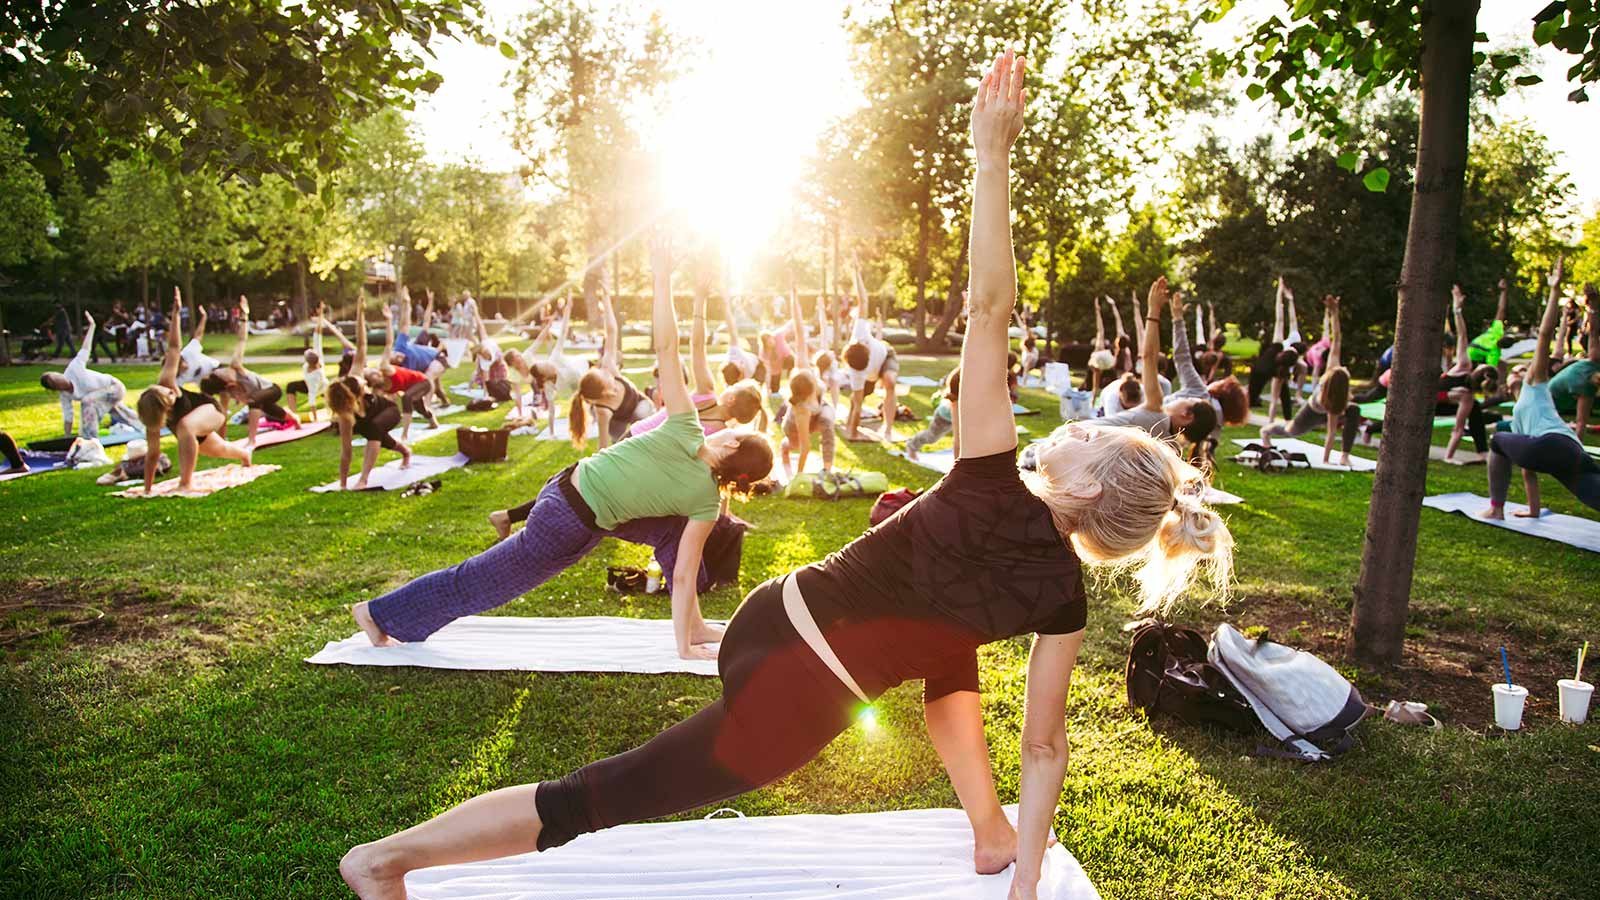 Adults attending a yoga class outside in park